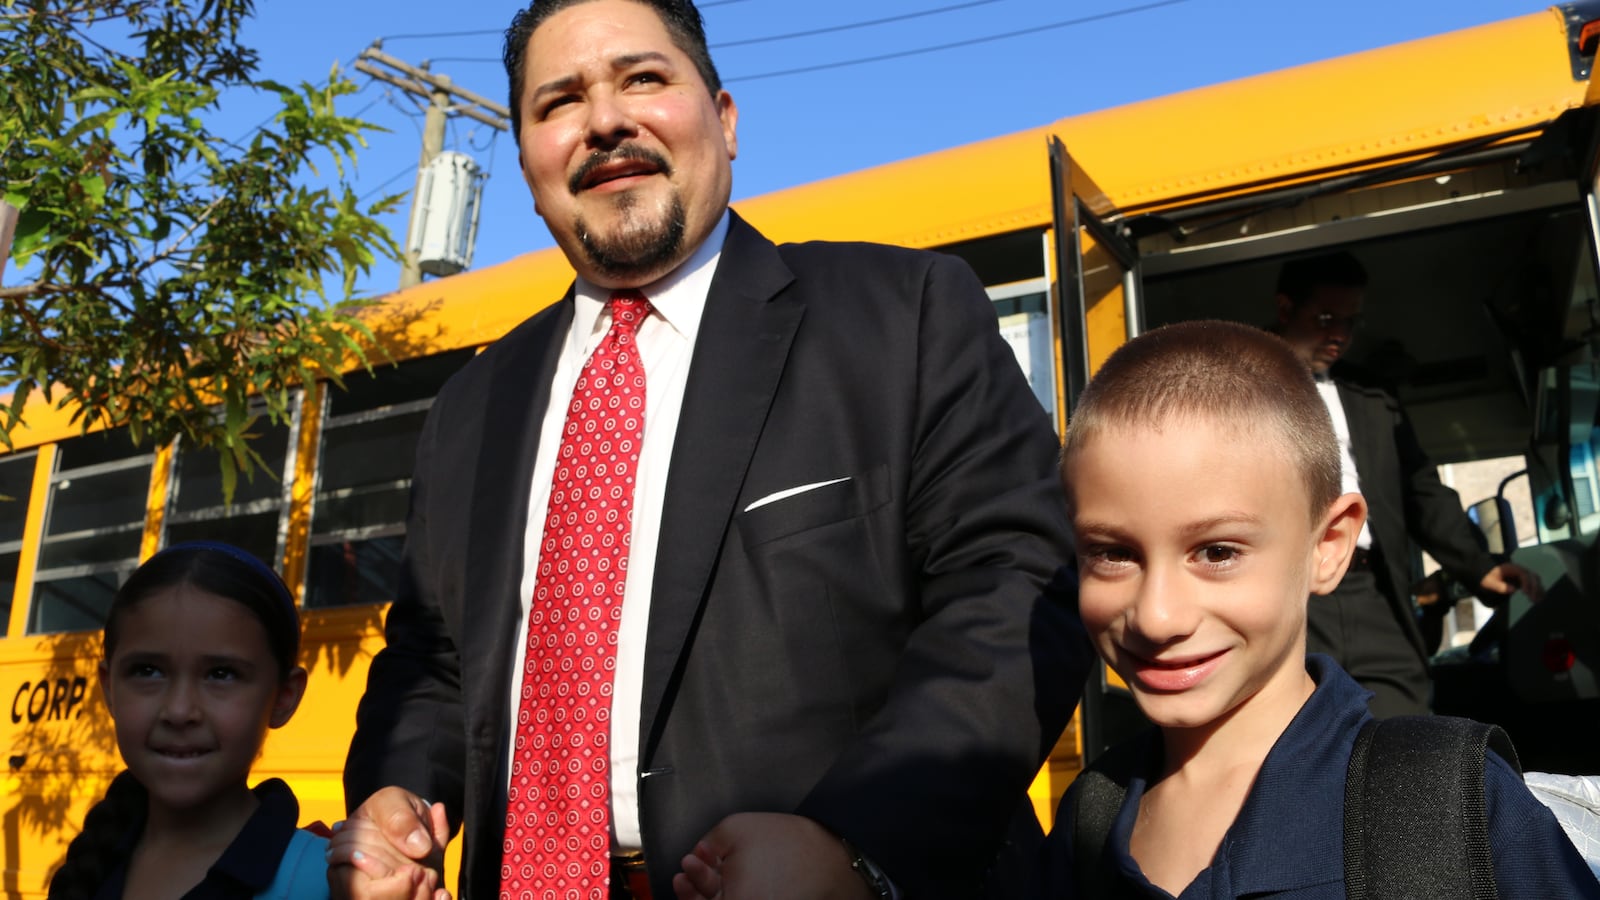 Schools Chancellor Richard Carranza rode a school bus to P.S. 377 in Ozone Park, Queens, on the first day of the 2018-2019 school year.